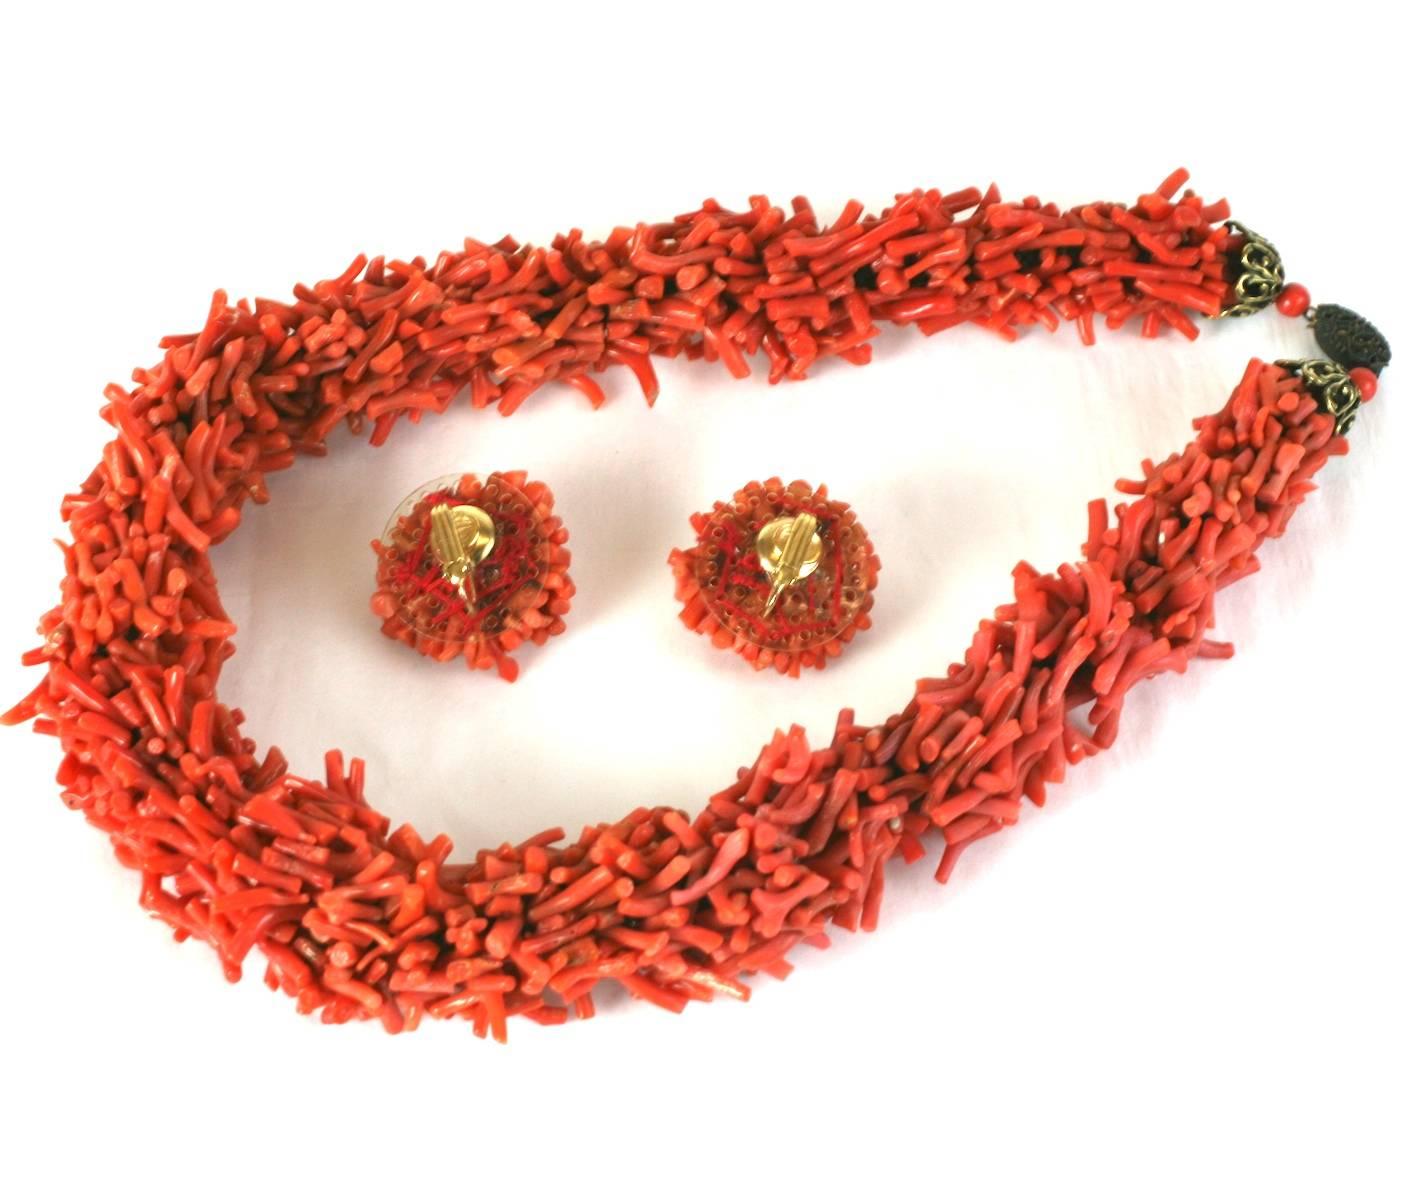 Wonderful Branch Coral Suite composing rope necklace sewn with hundreds of branch coral pieces to form a tubular coral necklace. Coral branch pieces are also sewn onto a backing to form clip button earrings. 
The necklace has bronze toned filigree